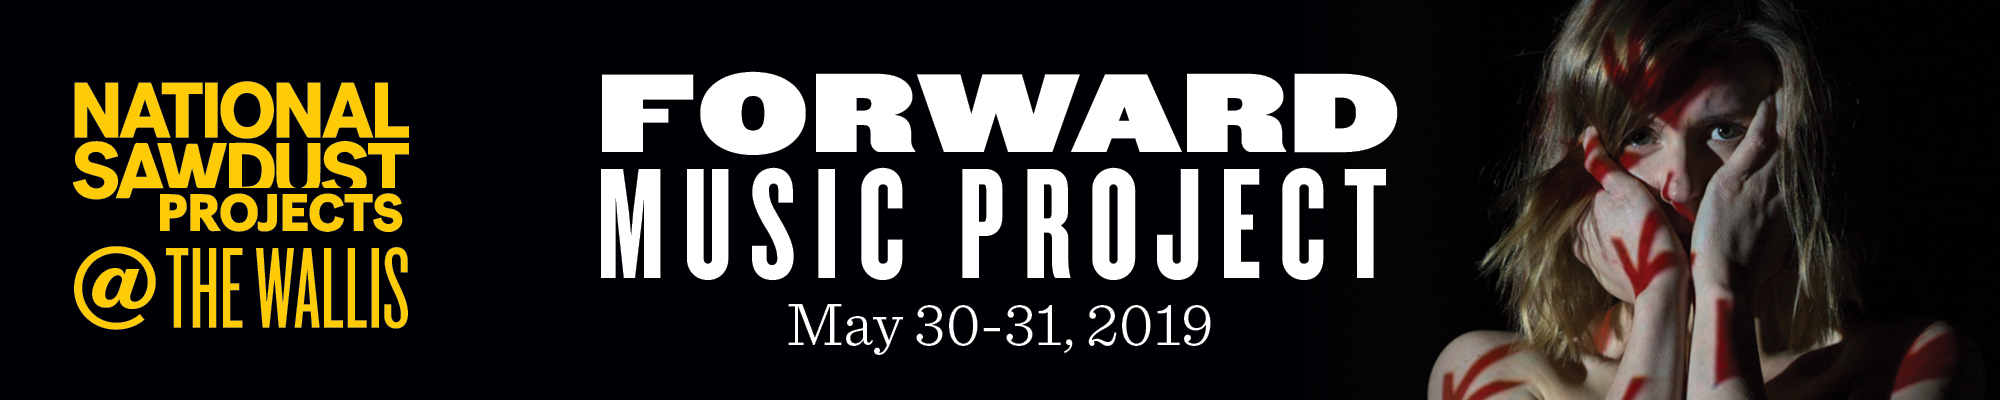 FORWARD MUSIC PROJECT